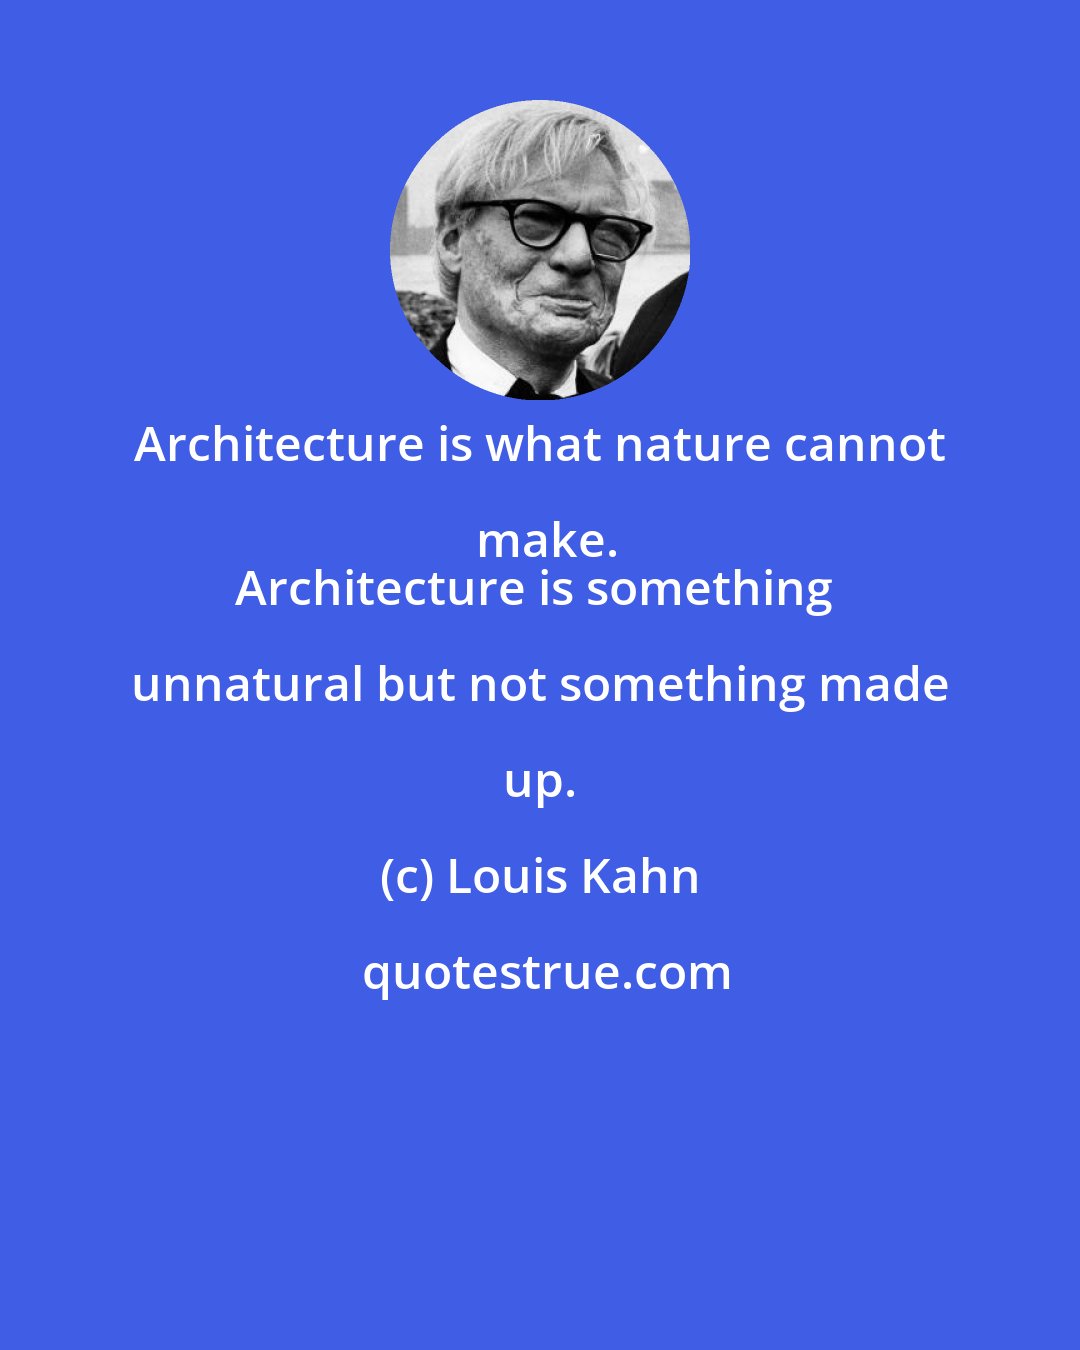 Louis Kahn: Architecture is what nature cannot make.
Architecture is something unnatural but not something made up.